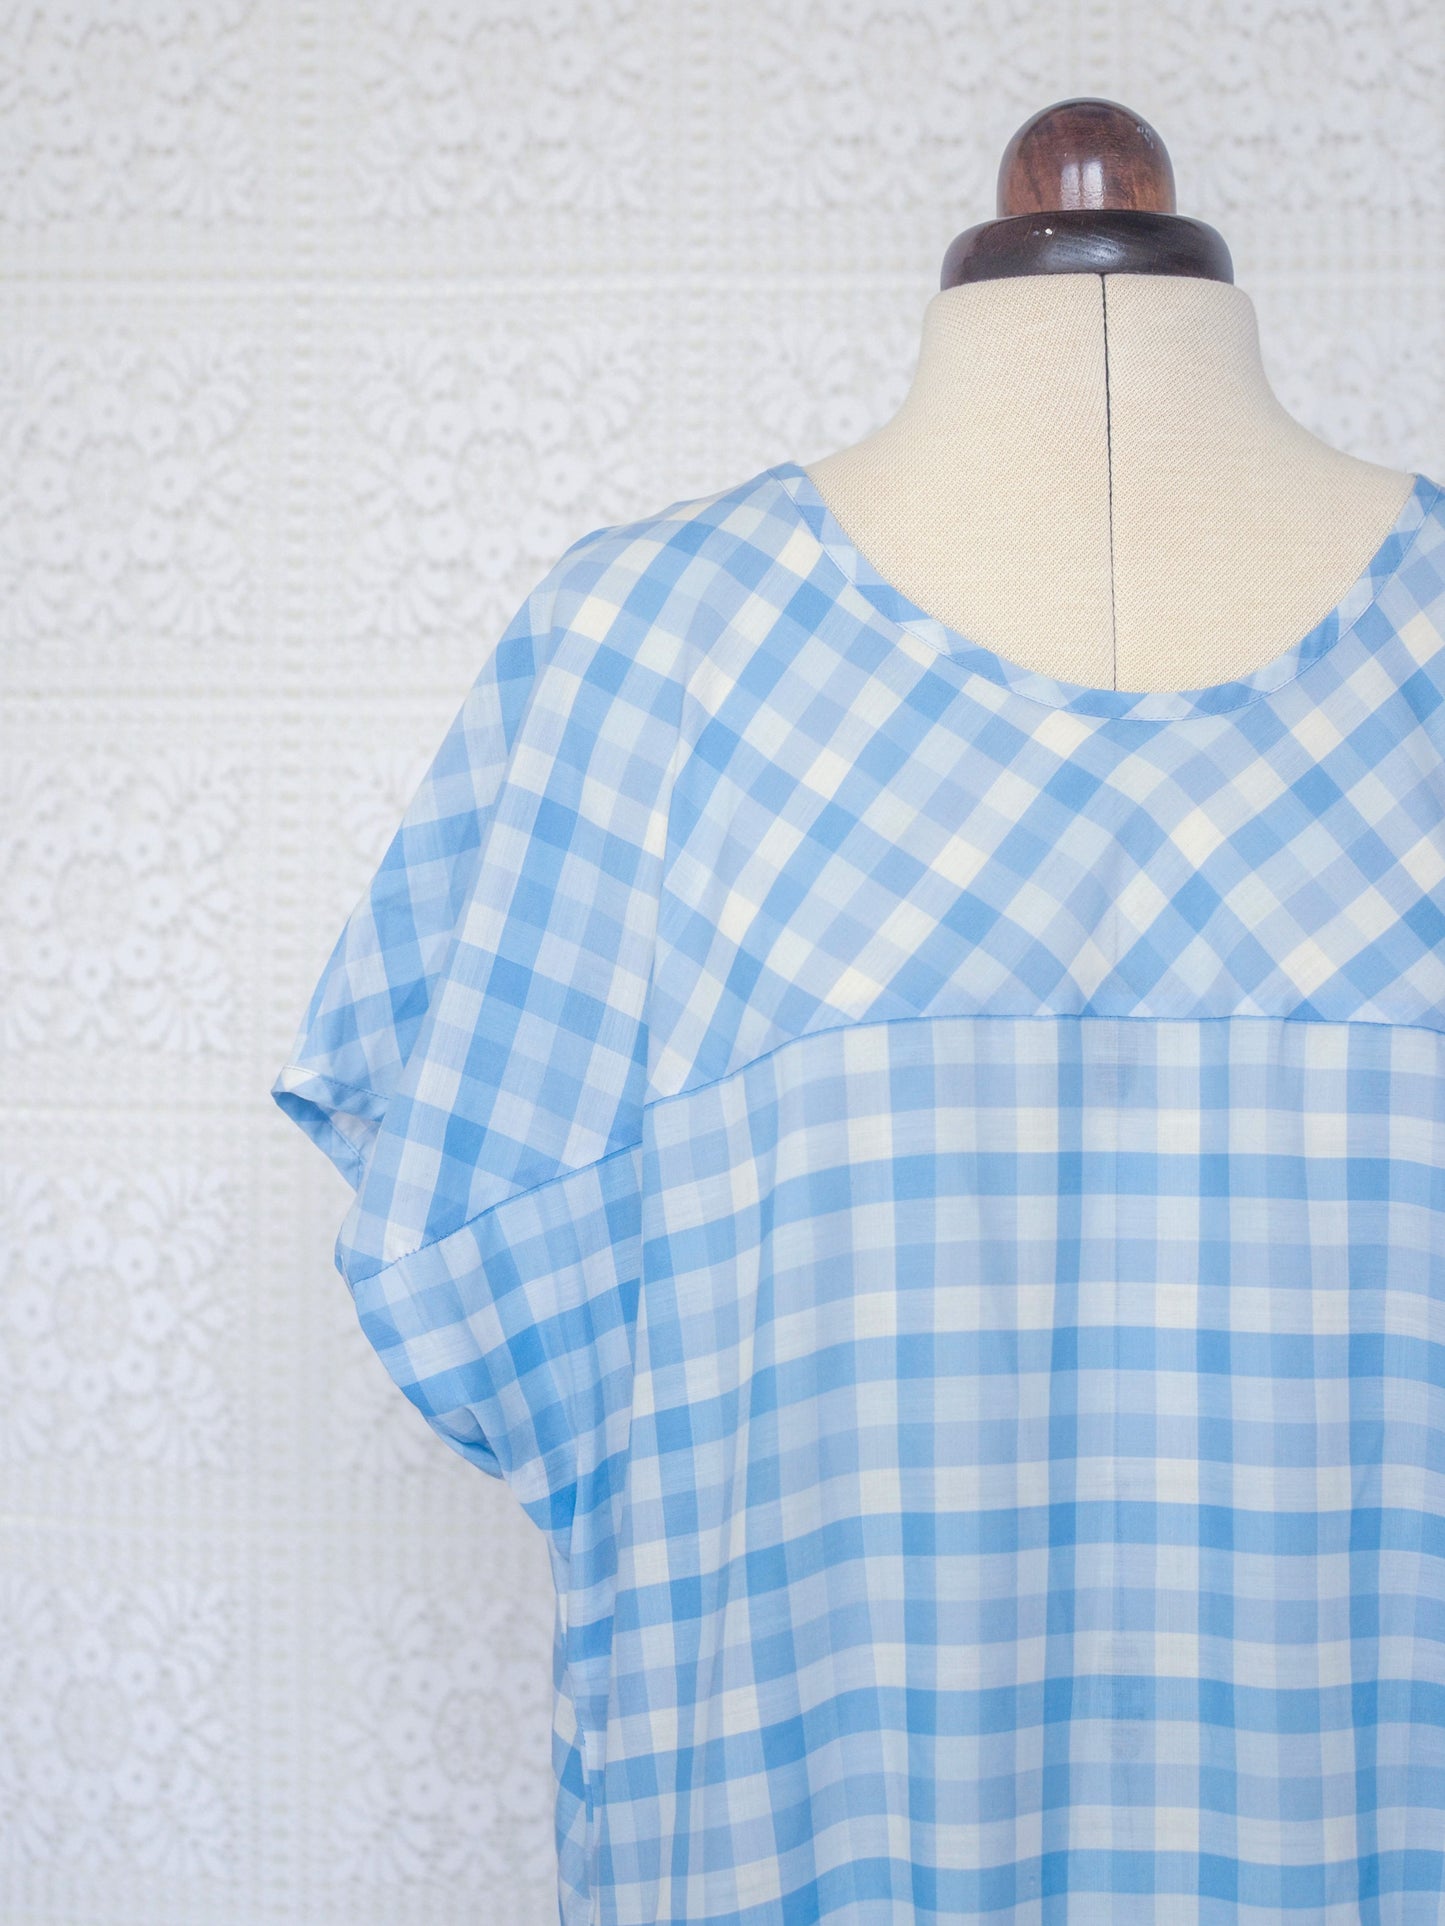 1980s style pale blue and white gingham smock dress with pockets